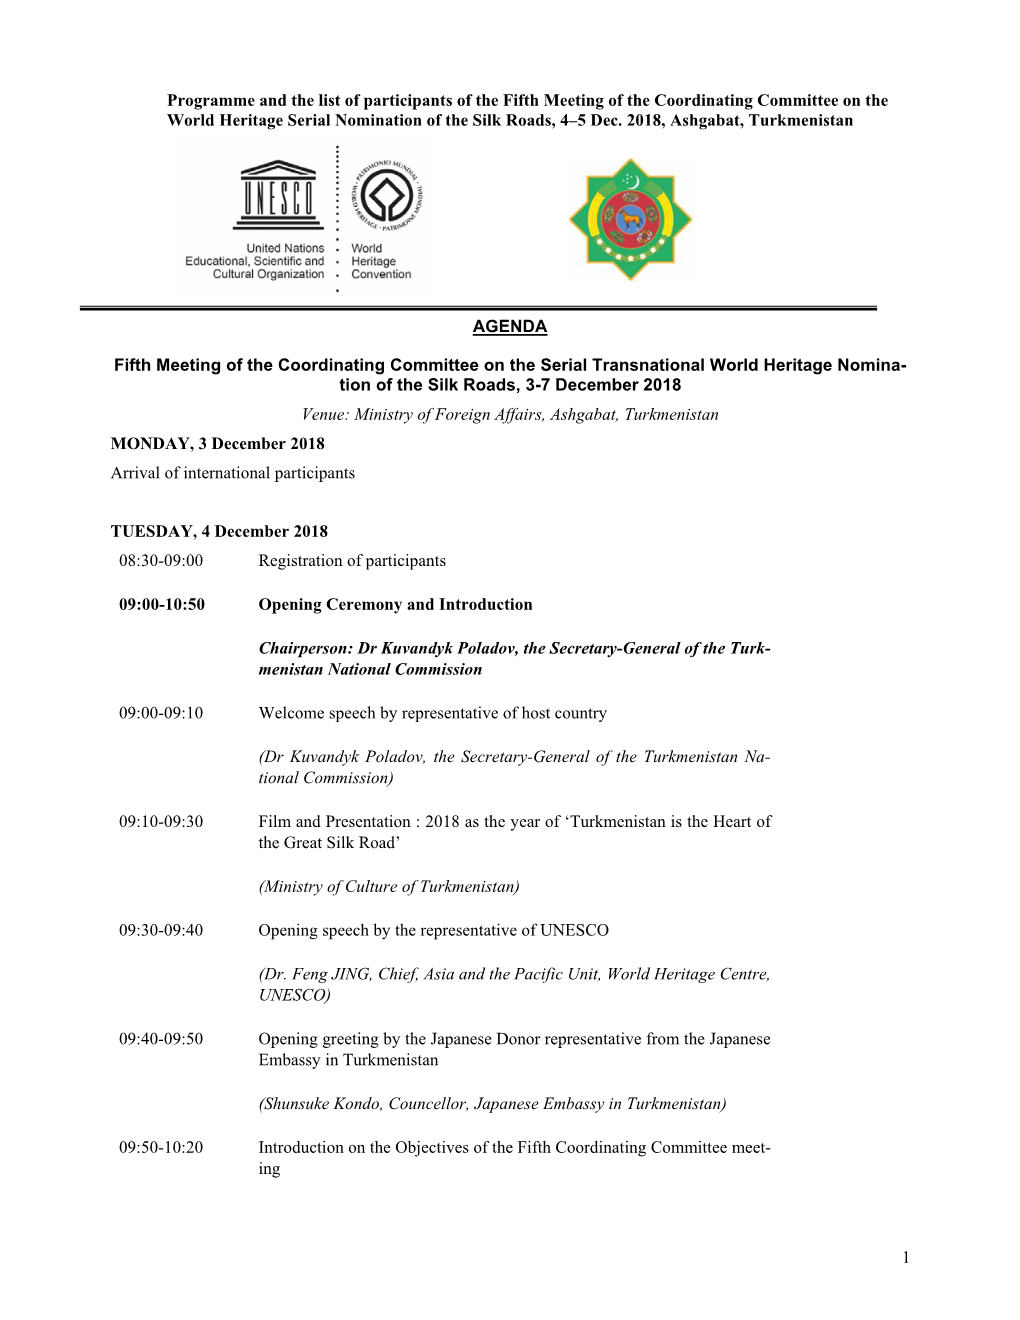 1 Programme and the List of Participants of the Fifth Meeting Of